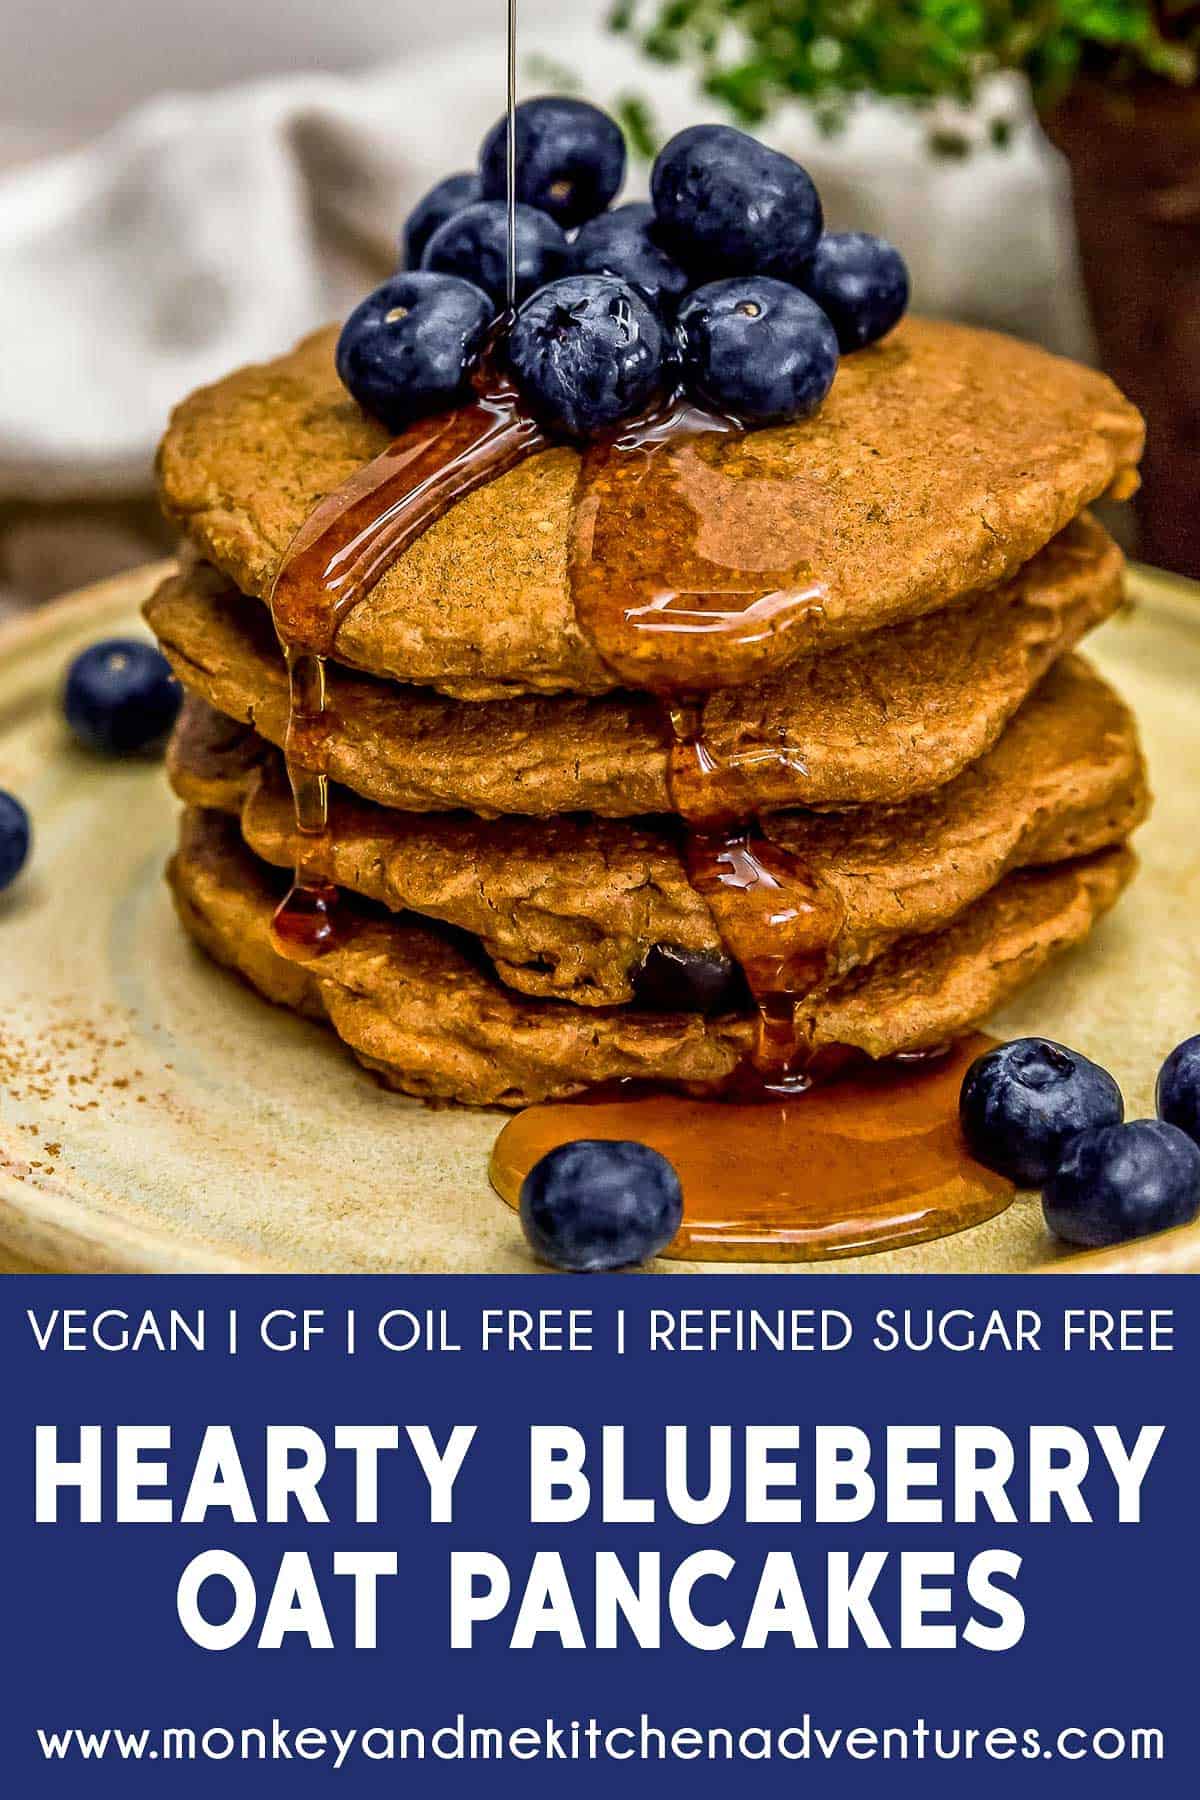 Hearty Blueberry Oat Pancakes with text description